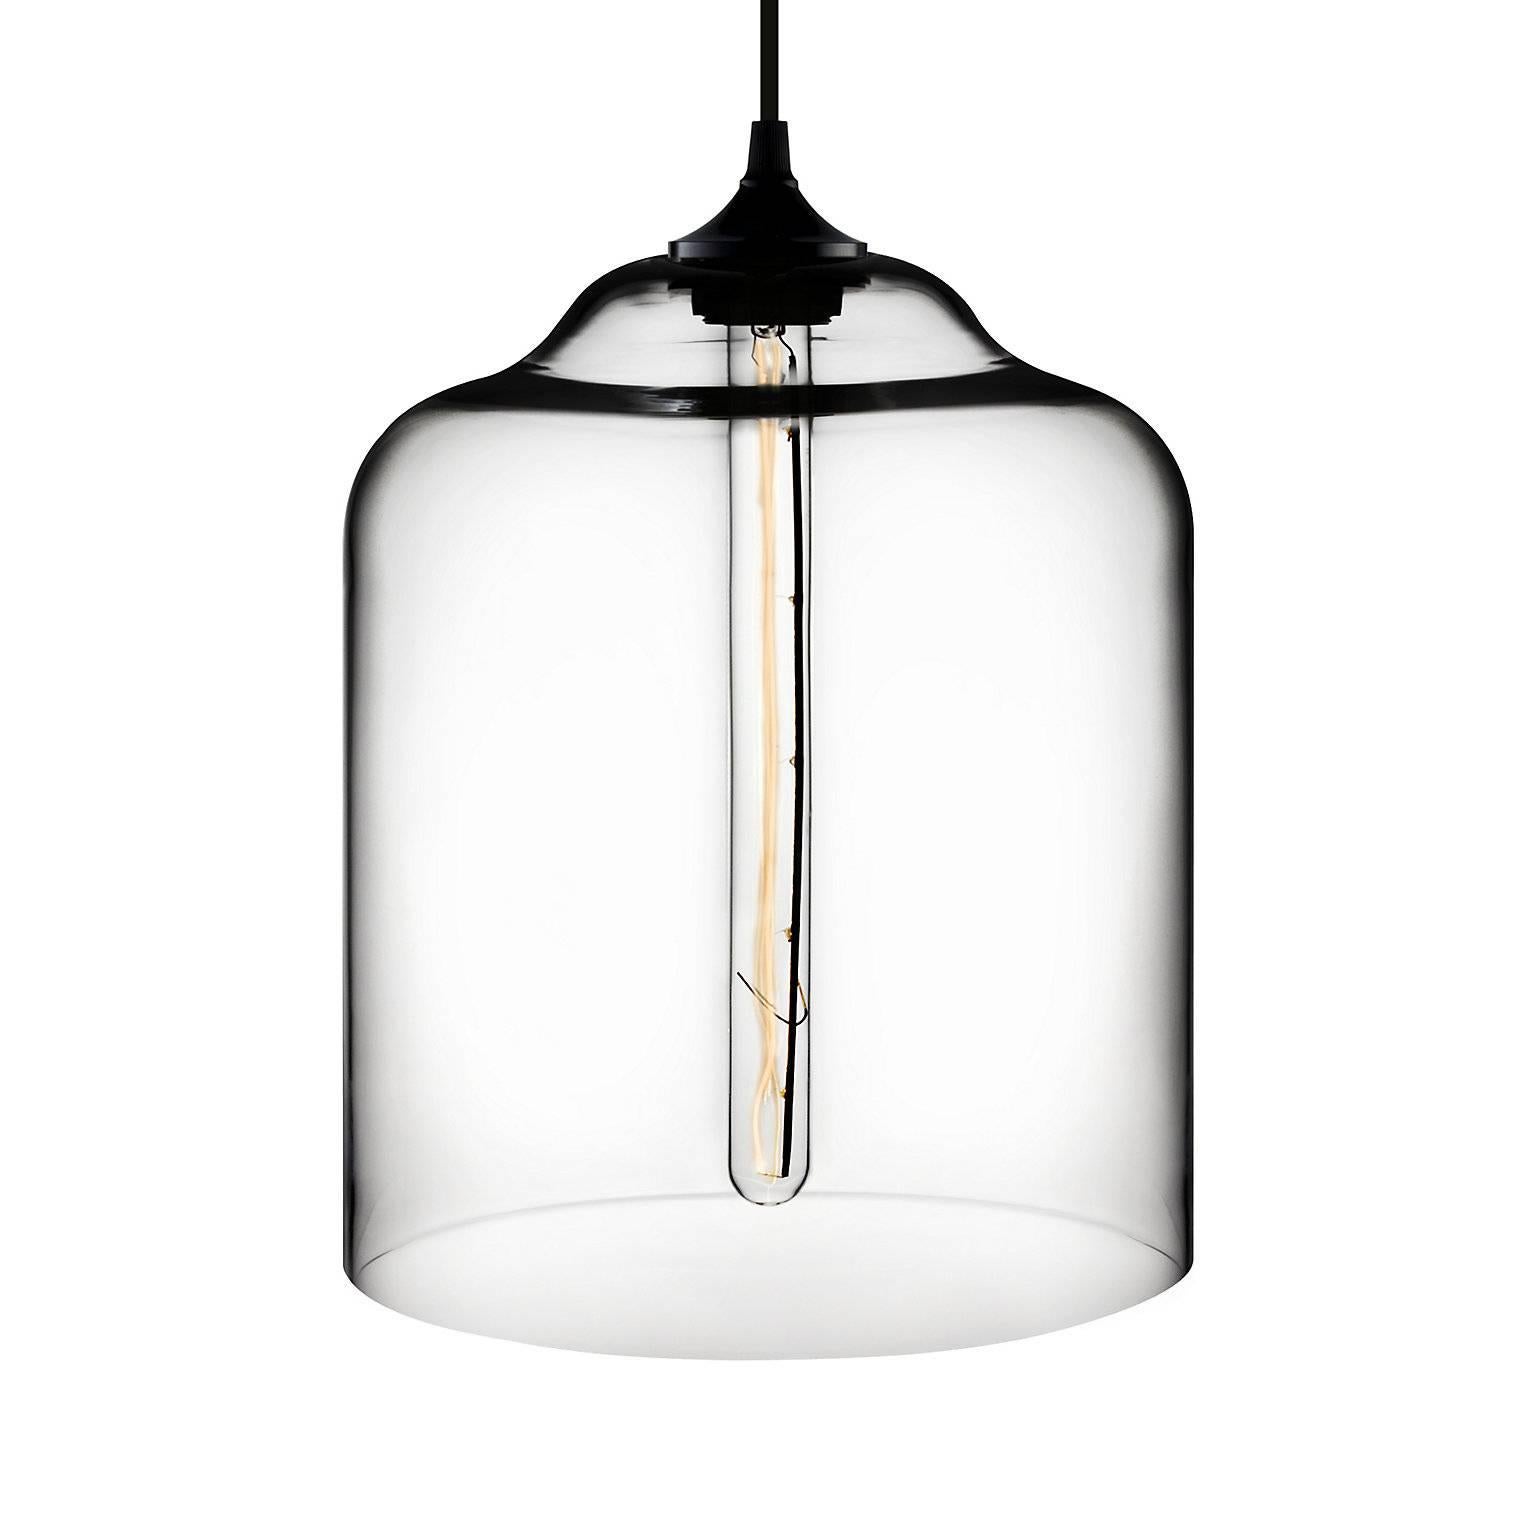 Celebrating iconic design, the bell jar and its sleeker companion, the bella, cast glorious beams of light that are as warm as they are welcoming. Every single glass pendant light that comes from Niche is hand-blown by real human beings in a